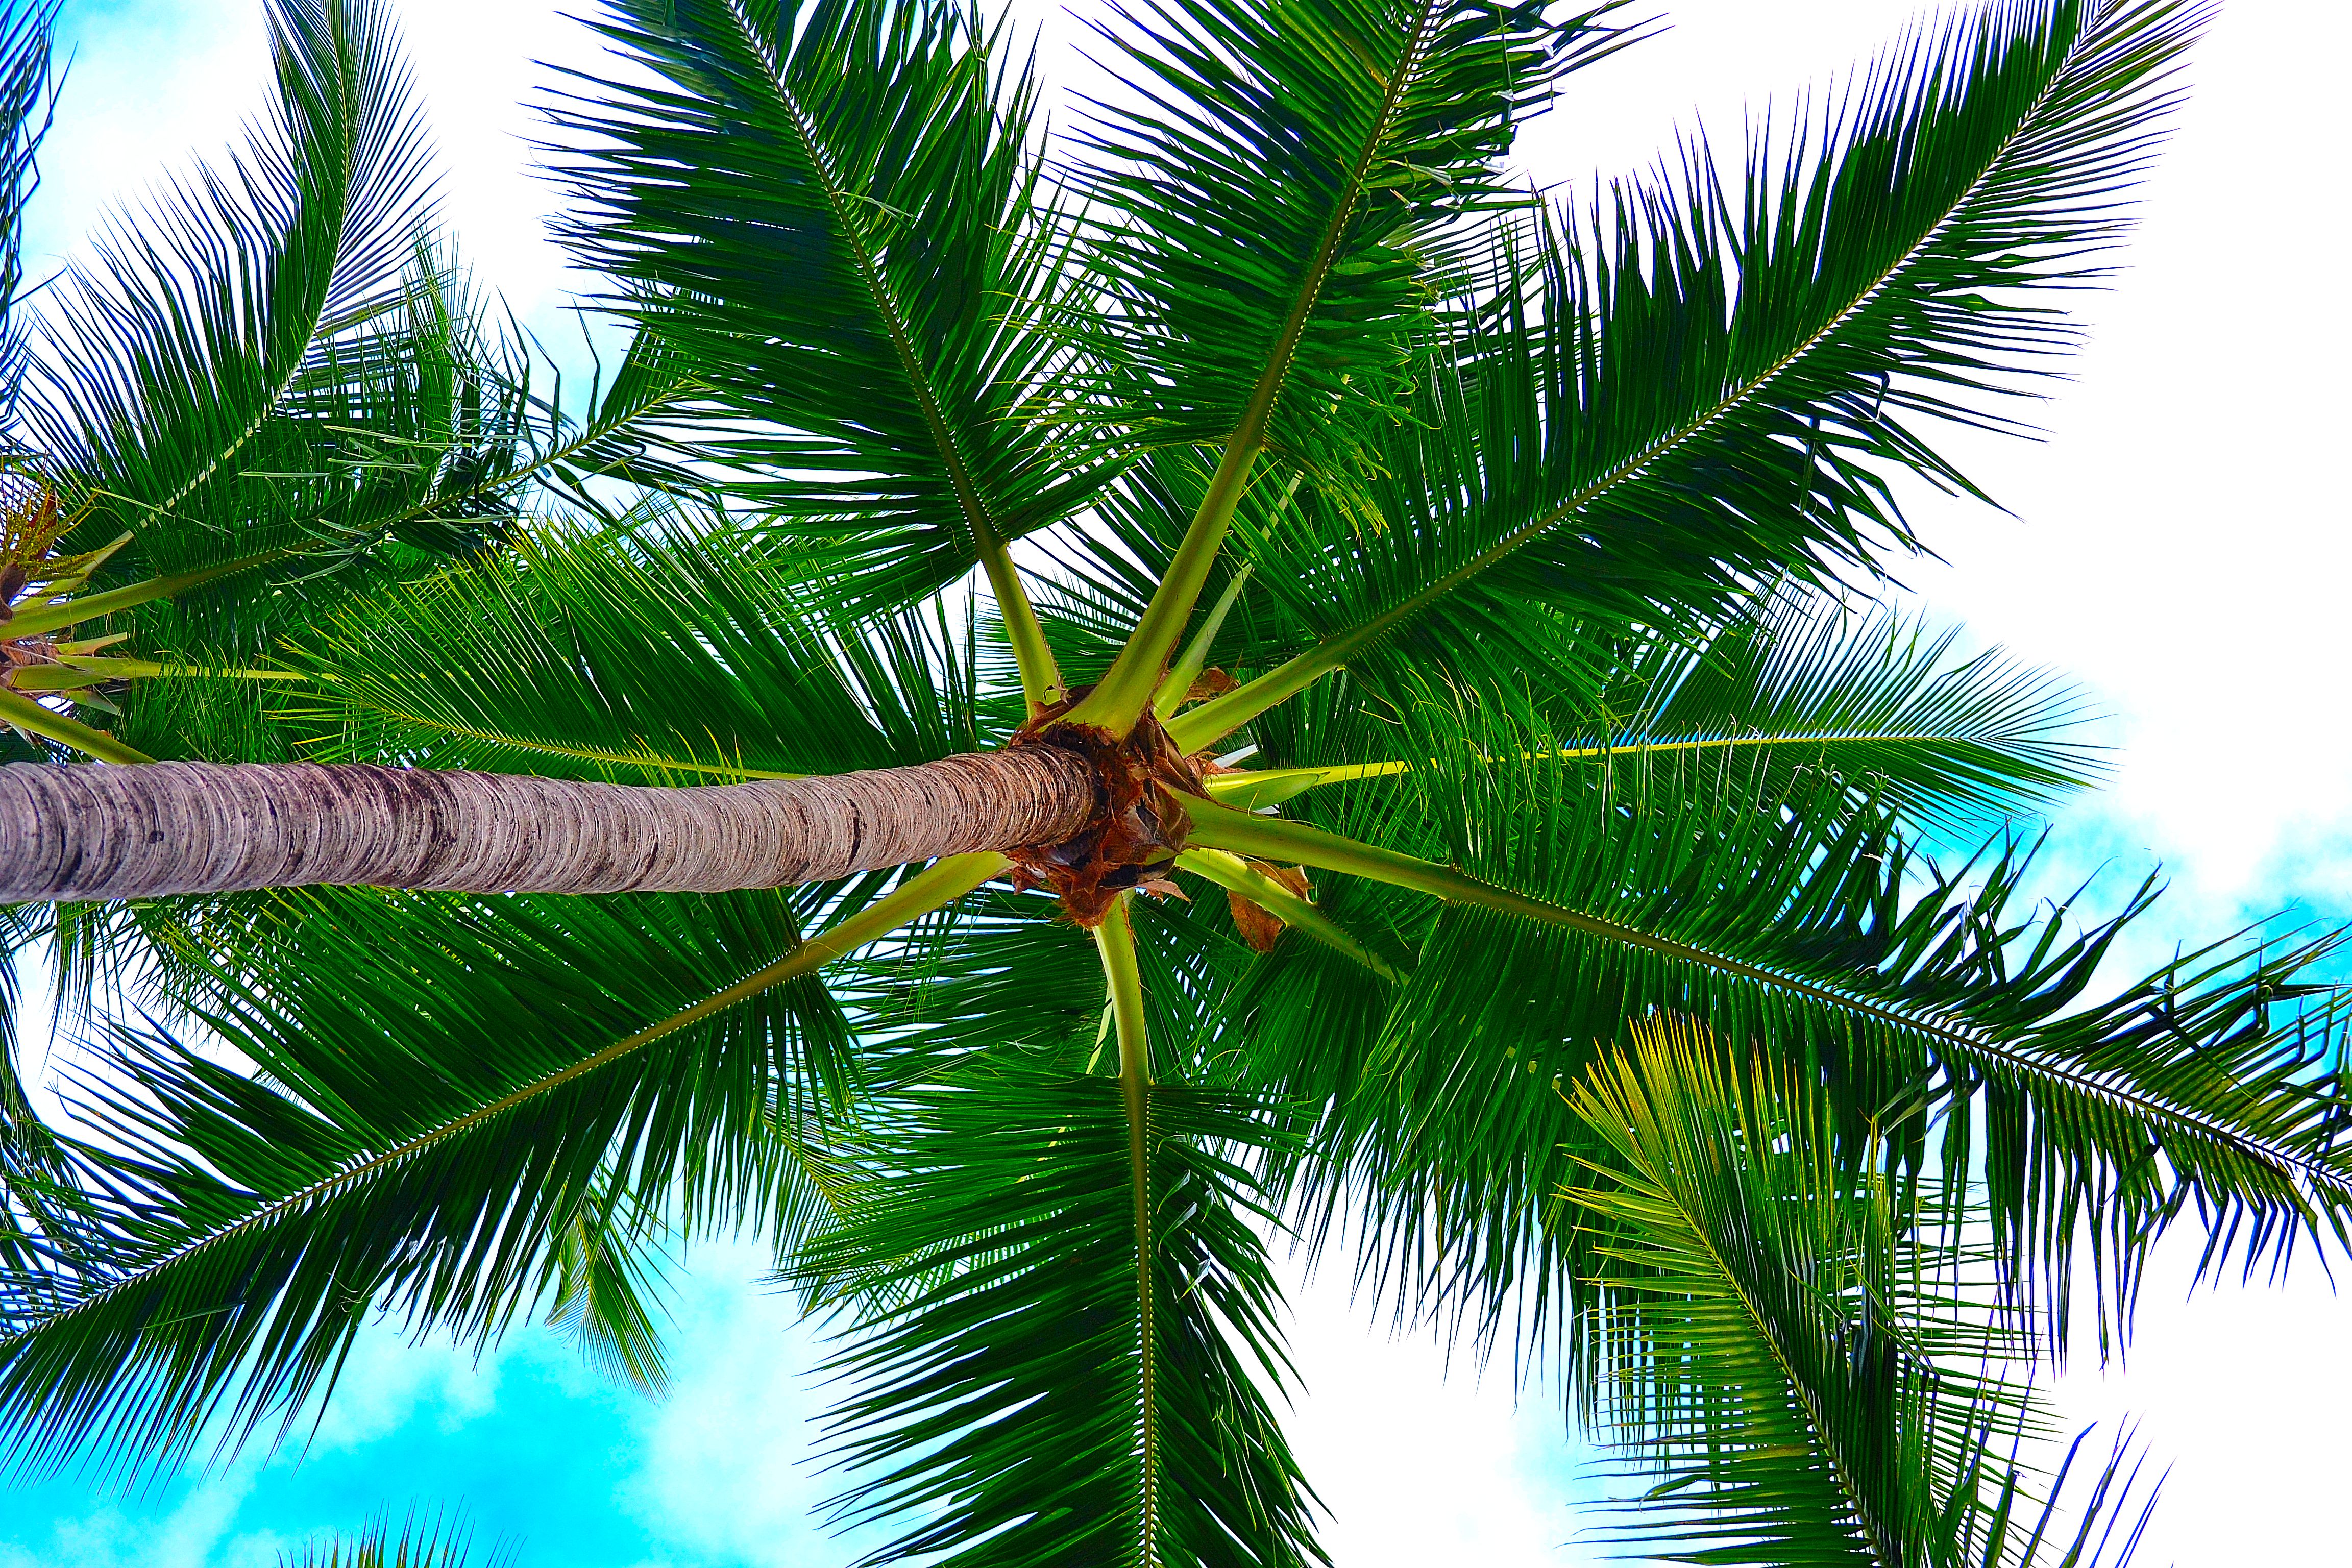 wood, tree, nature, sky, palm, branches